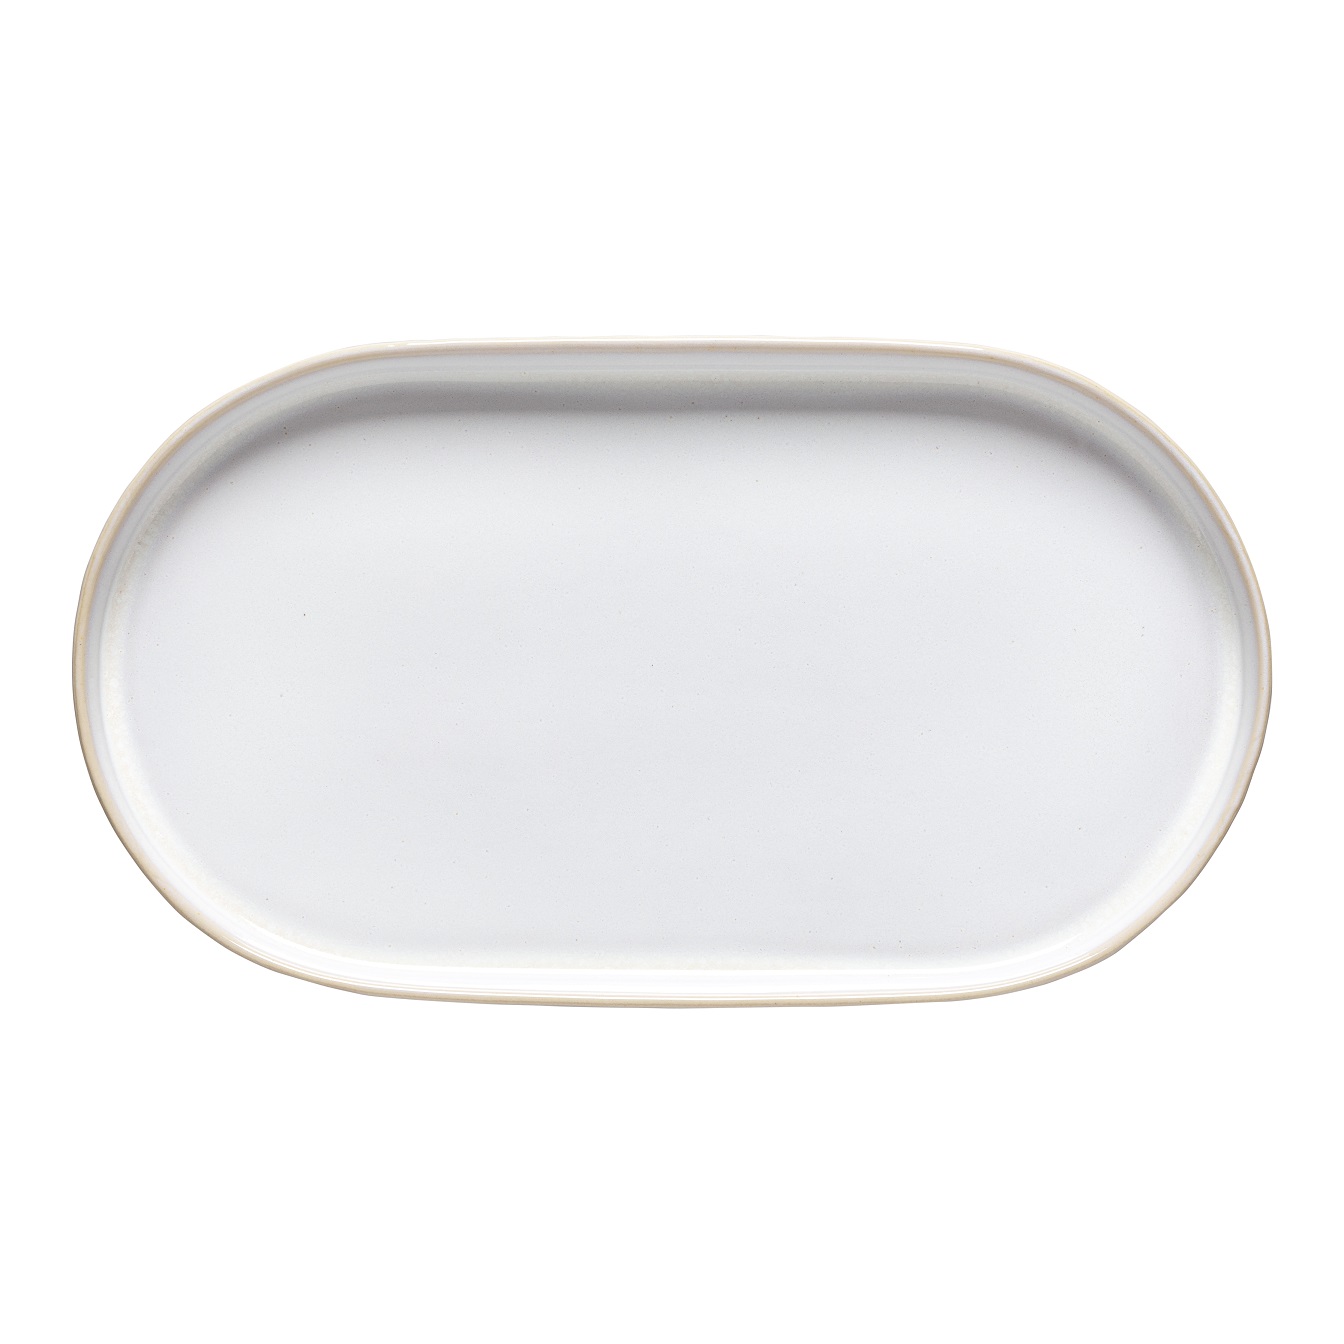 Notos Dune Path Oval Platter/tray 37cm Gift